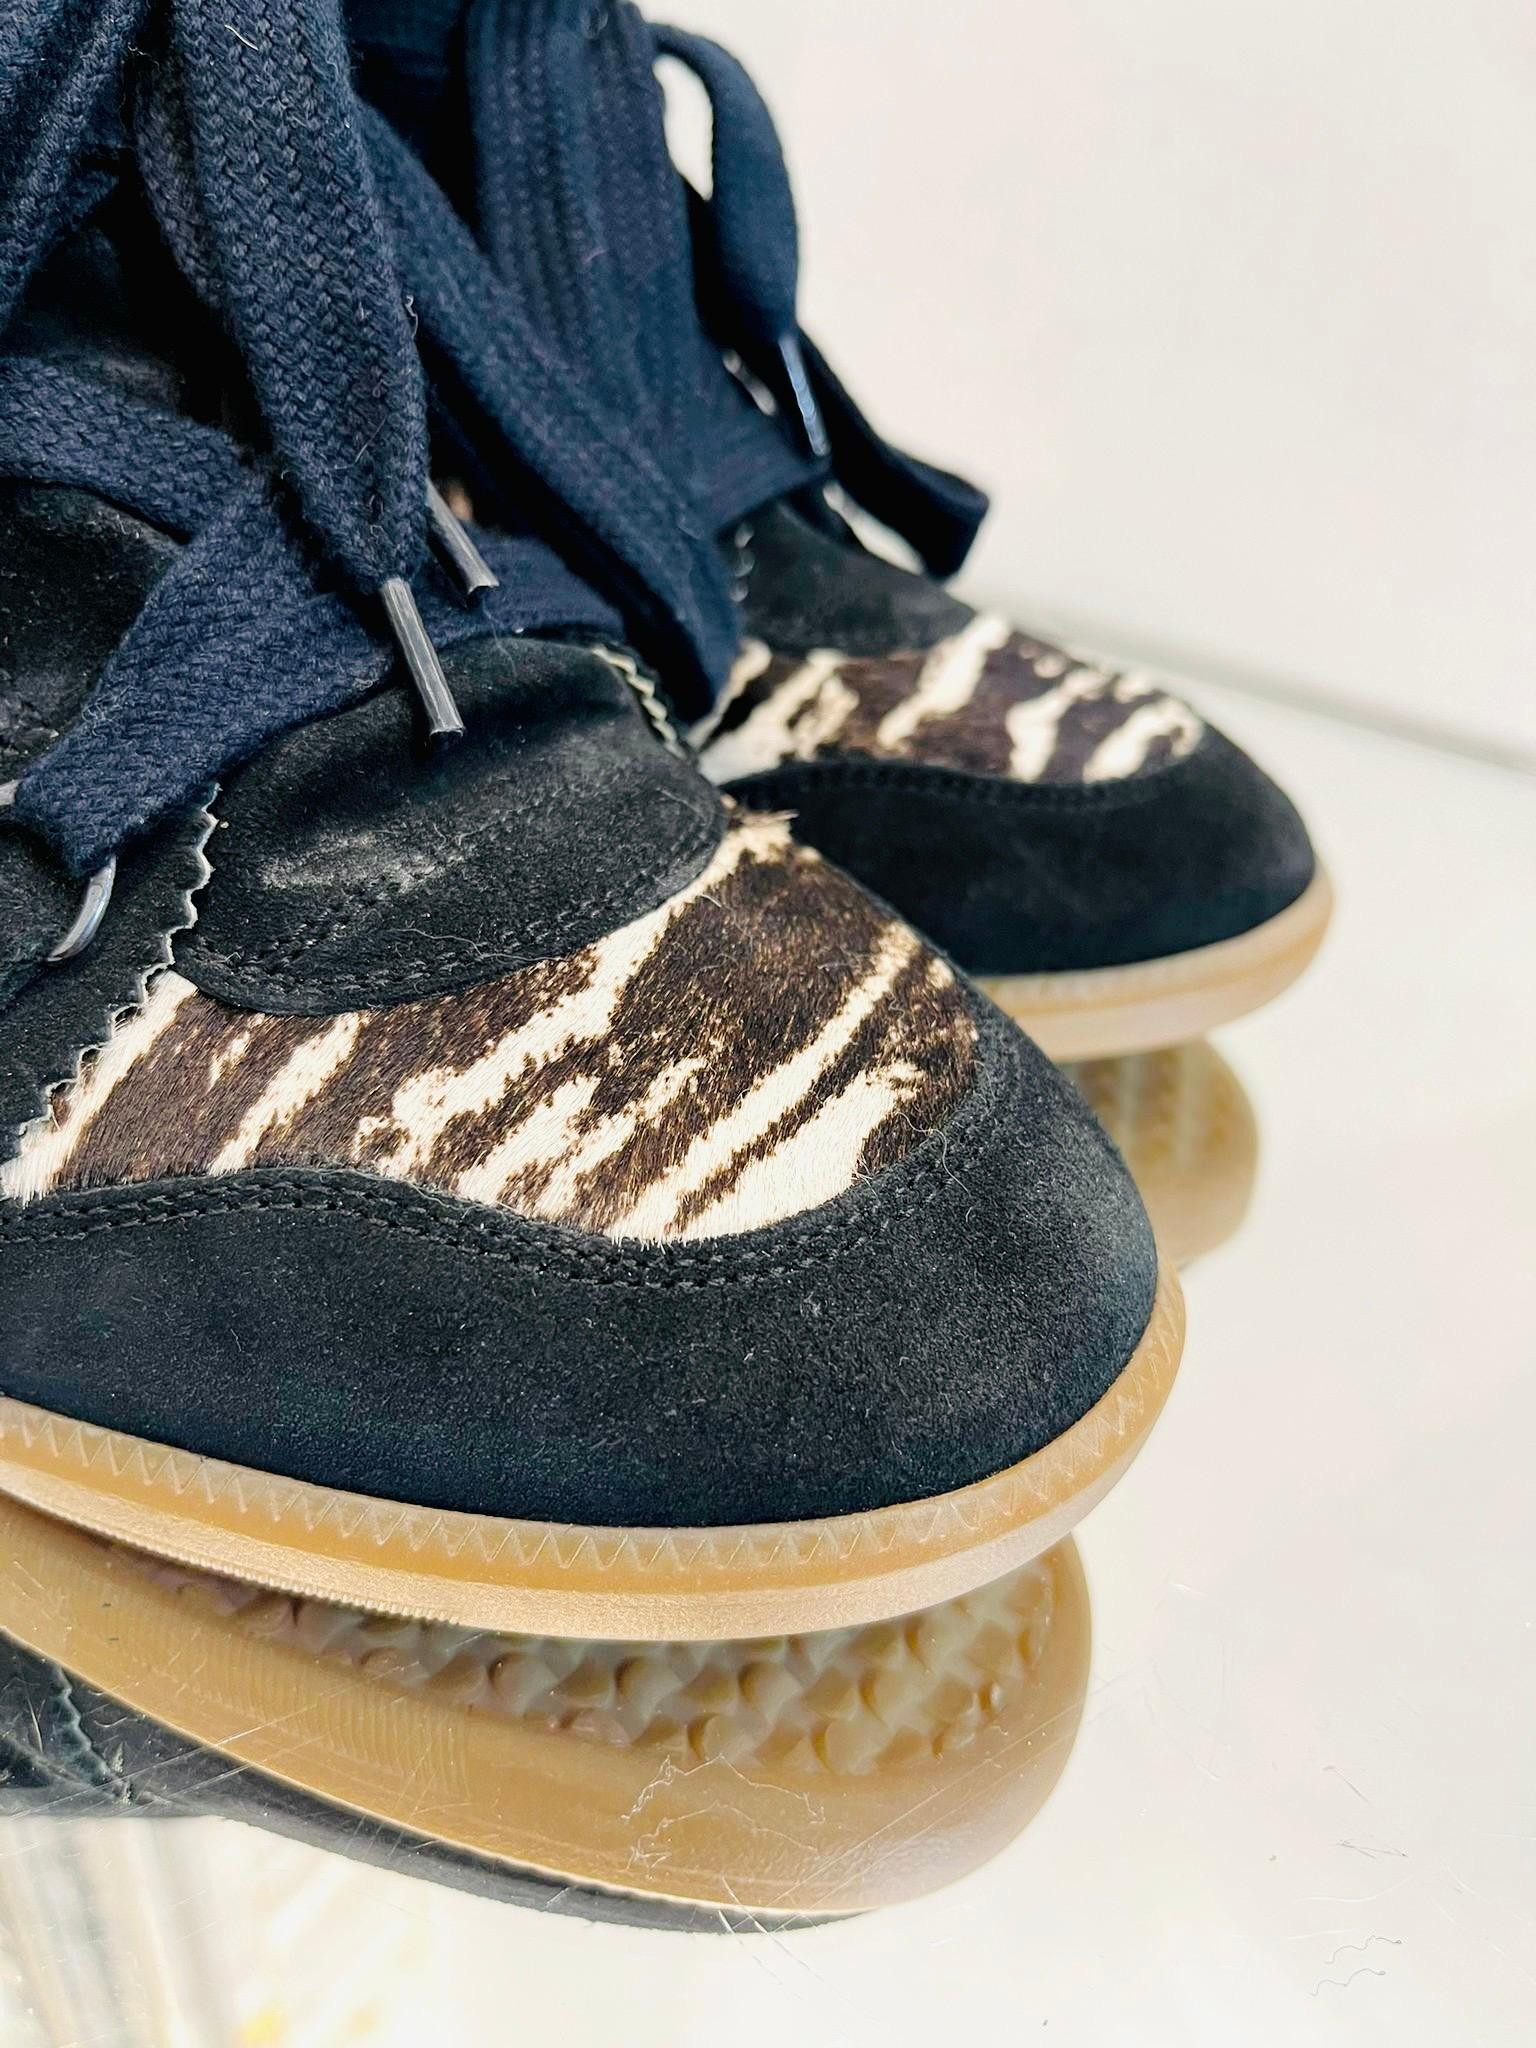 Isabel Marant Pony Hair Seuede Wedge Sneakers In Excellent Condition For Sale In London, GB